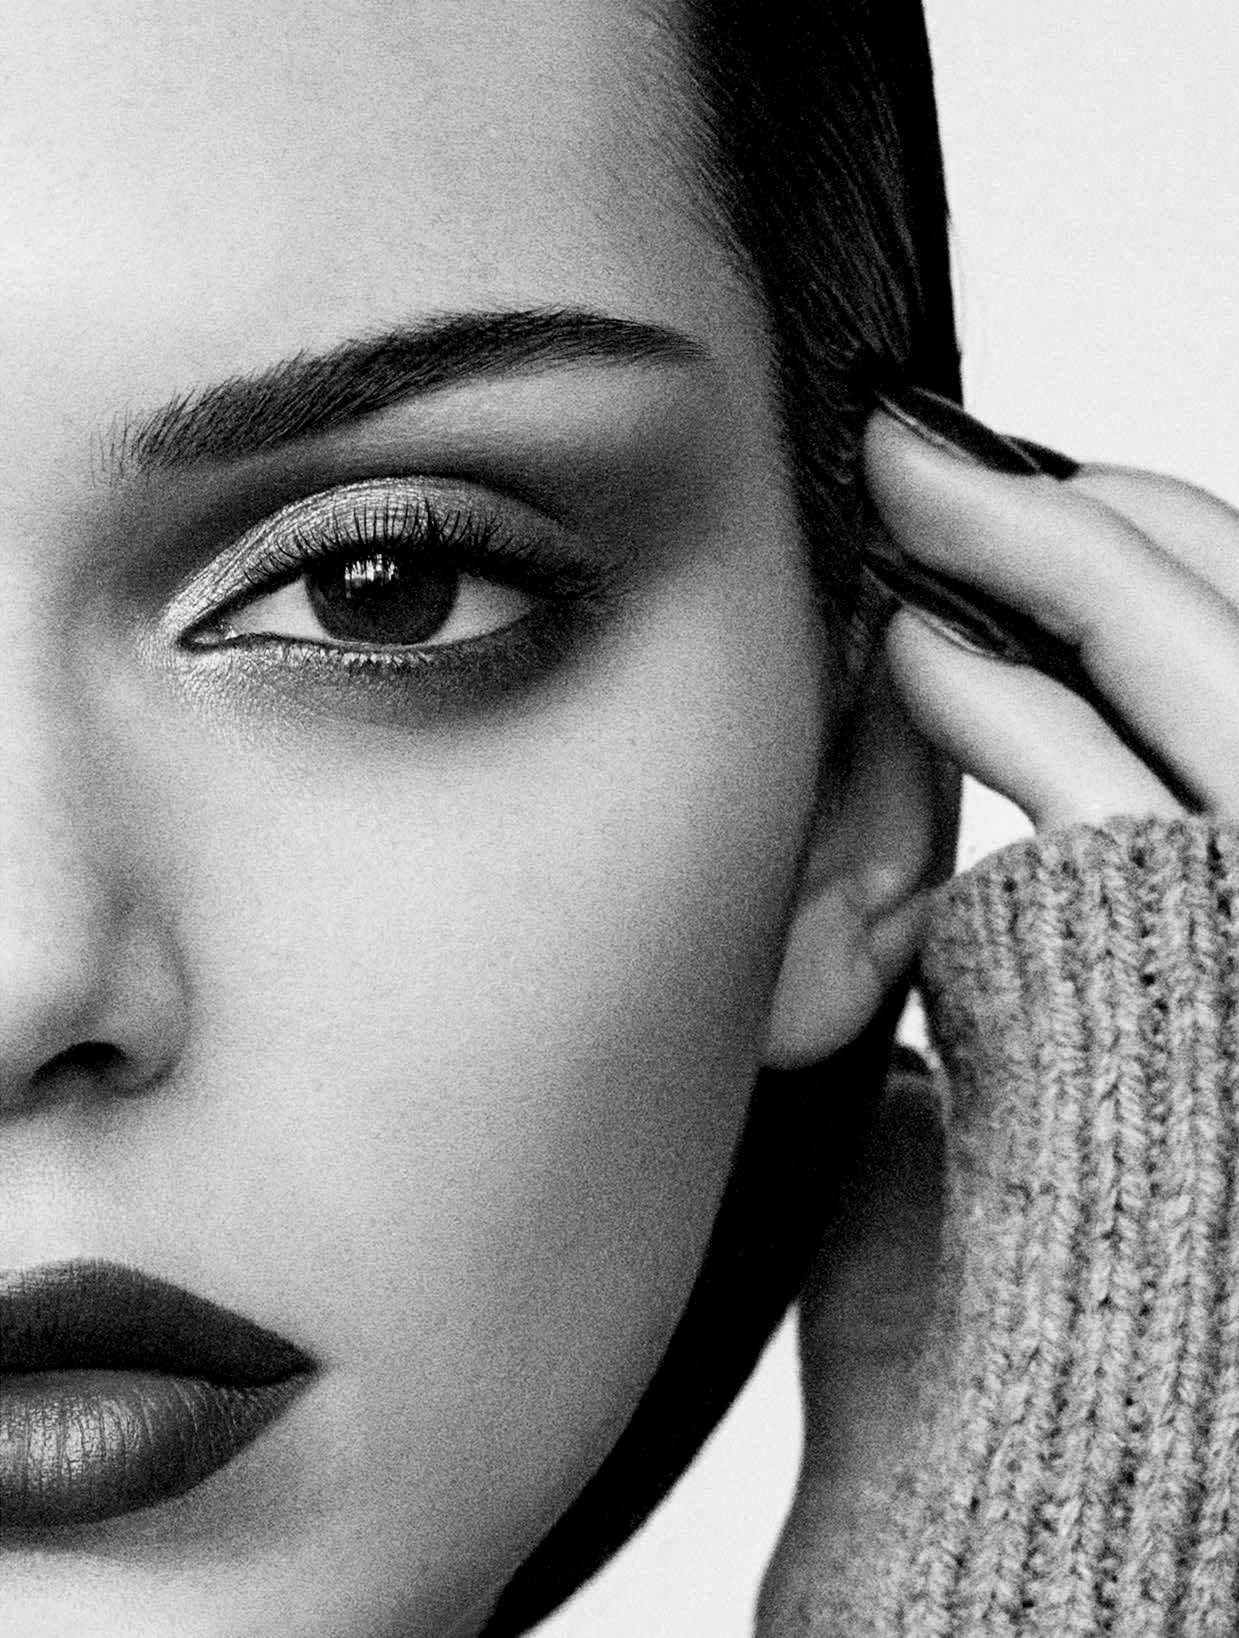 Kendall Jenner Vogue Italia Wallpapers